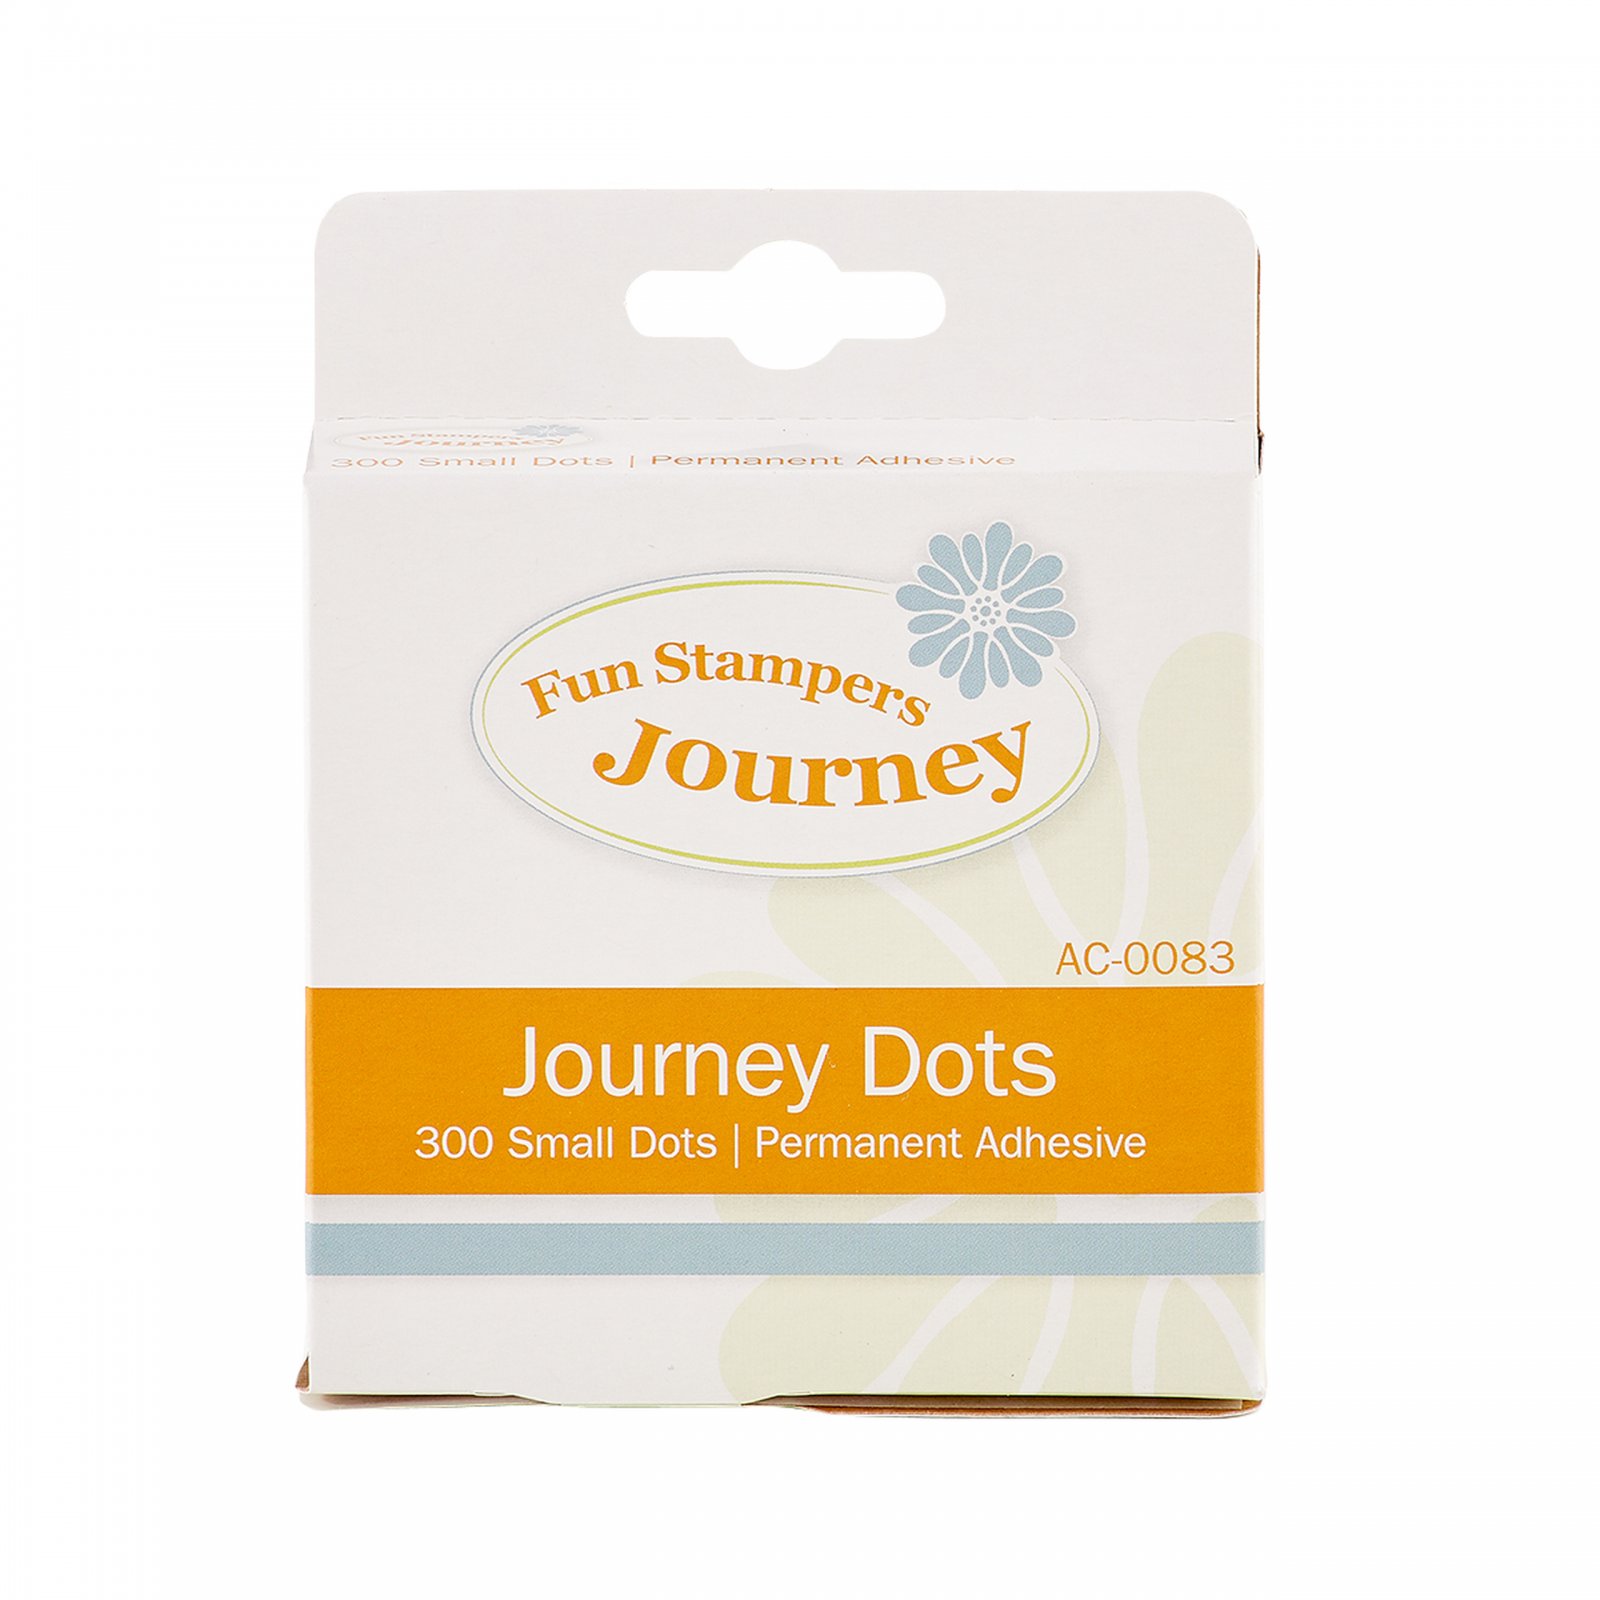 Warehouse Sale: Fun Stamper's Journey Small Glue Dots $2.99+taxes